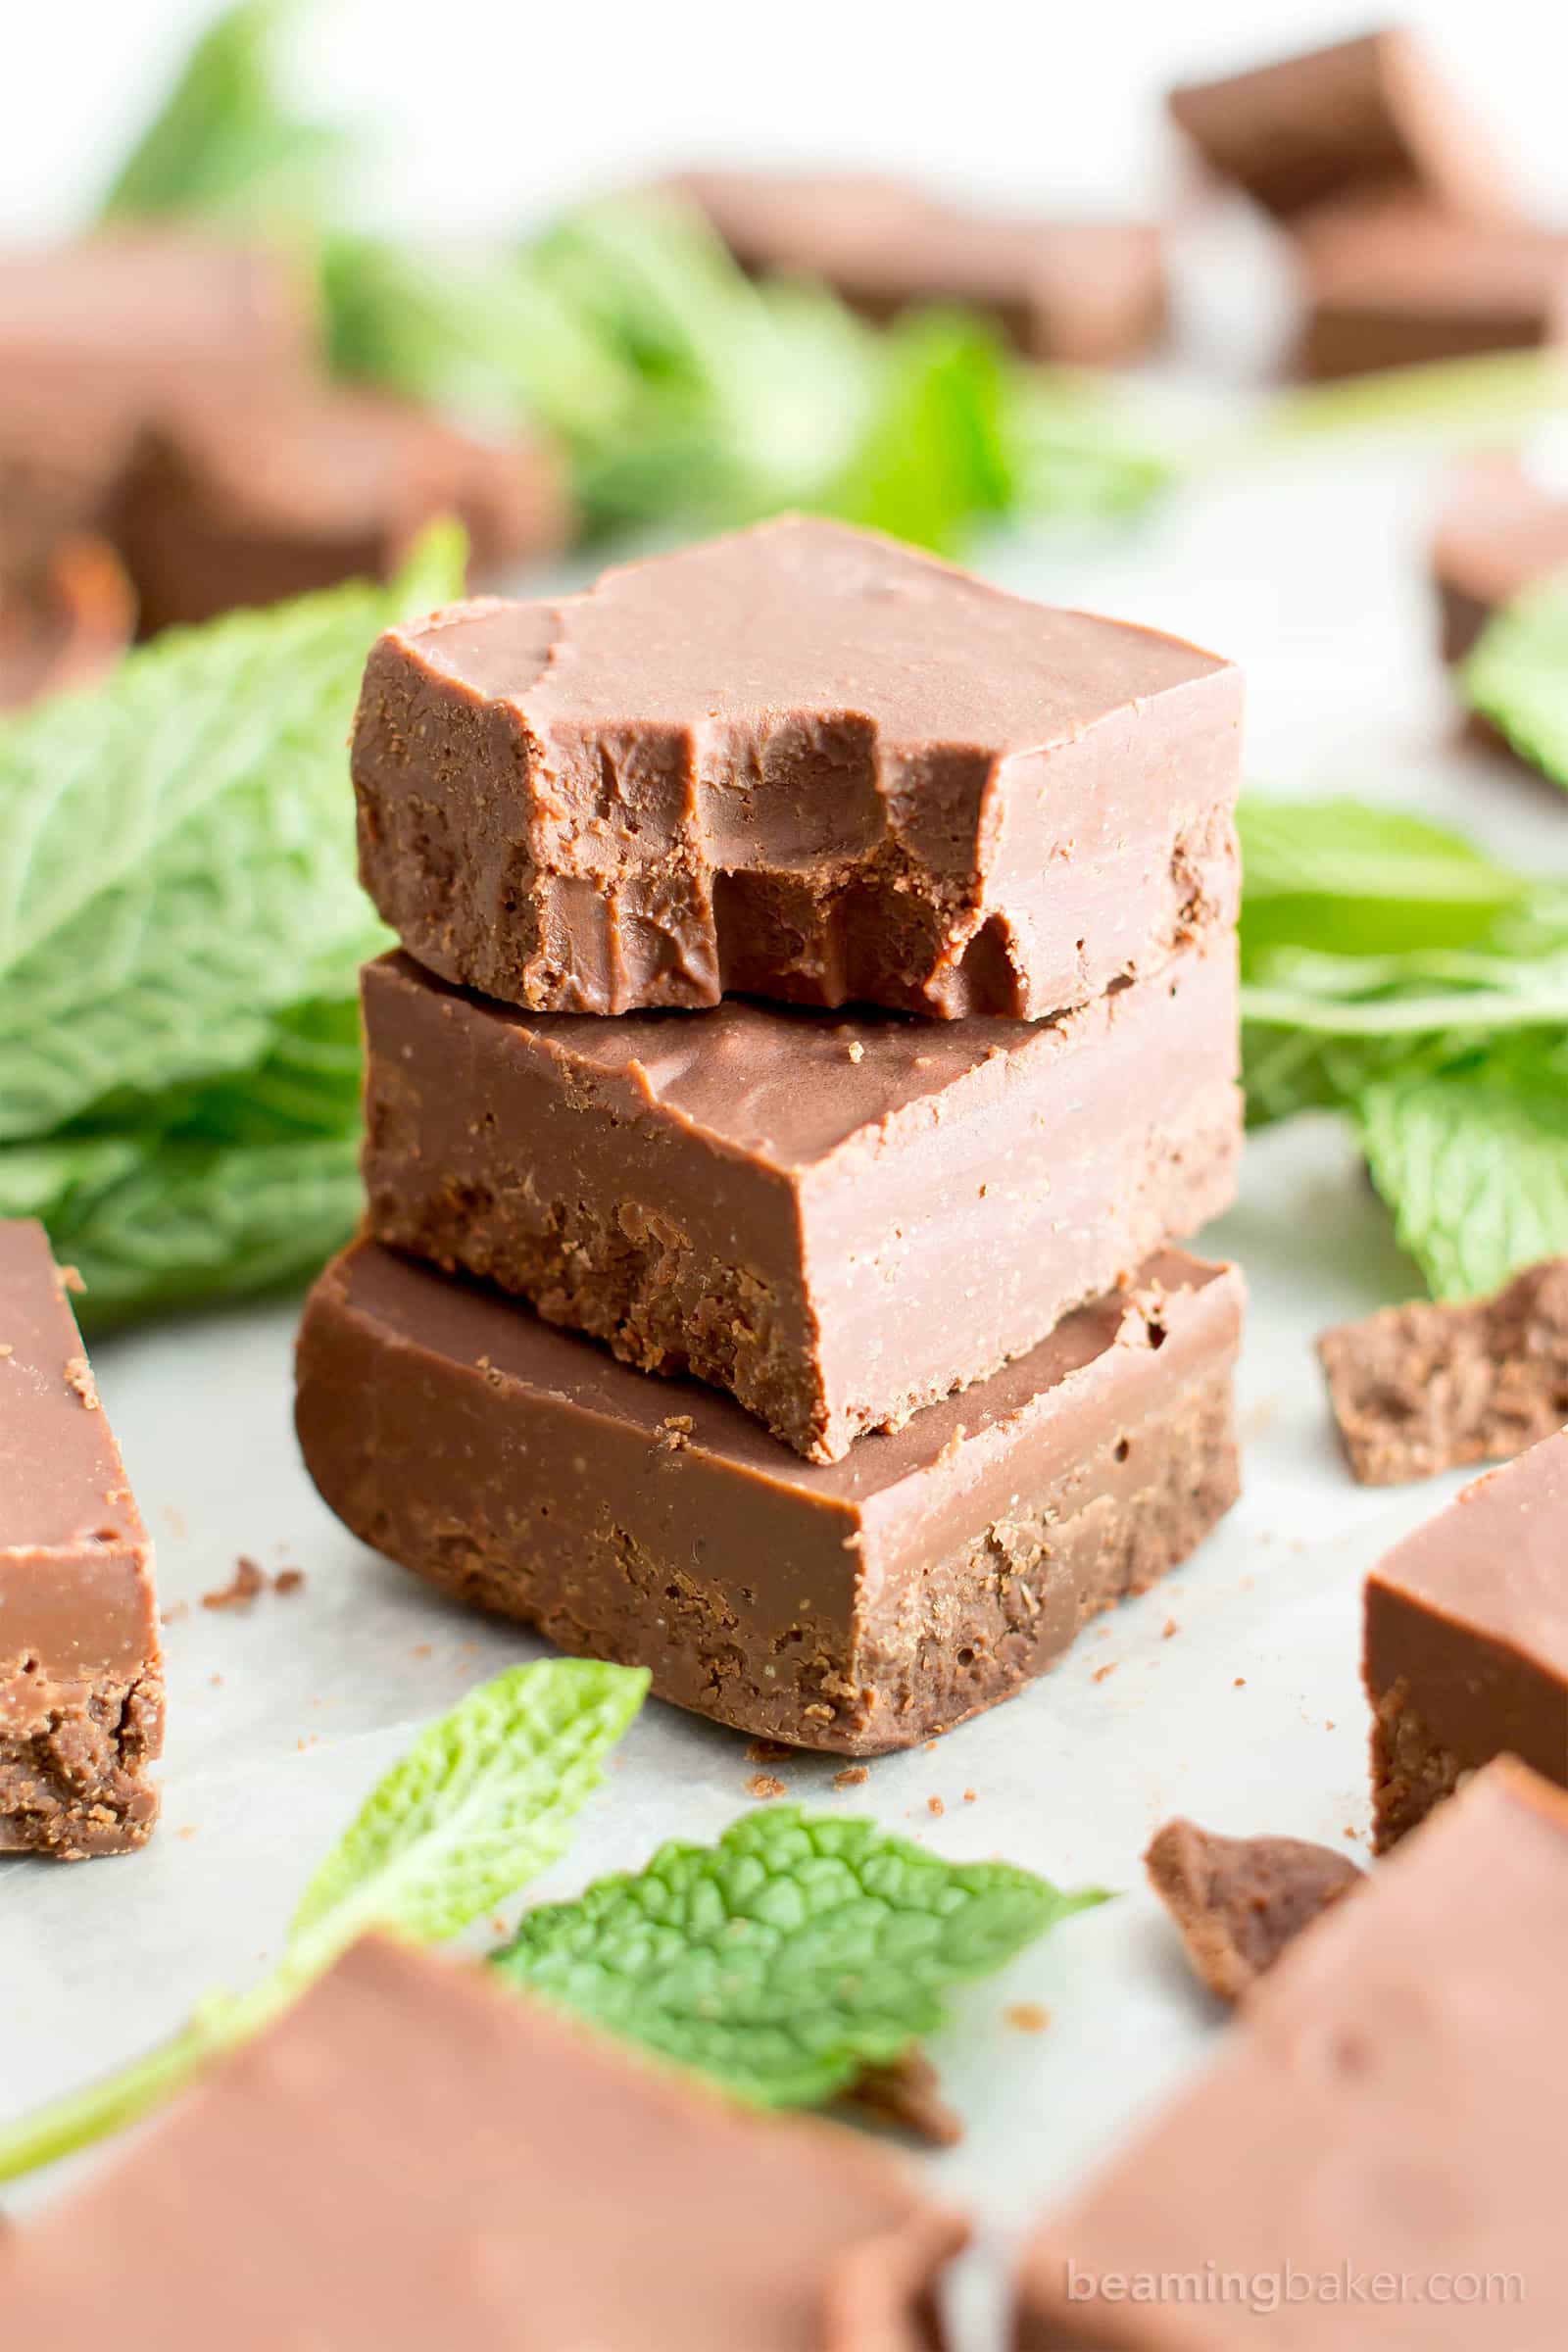 5 Minute Easy Peppermint Fudge (V, GF): a 3 ingredient recipe for creamy, thick indulgent chocolatey fudge squares made with healthy ingredients! #Paleo #Vegan #GlutenFree #DairyFree #HealthyHolidayDesserts | Recipe on BeamingBaker.com